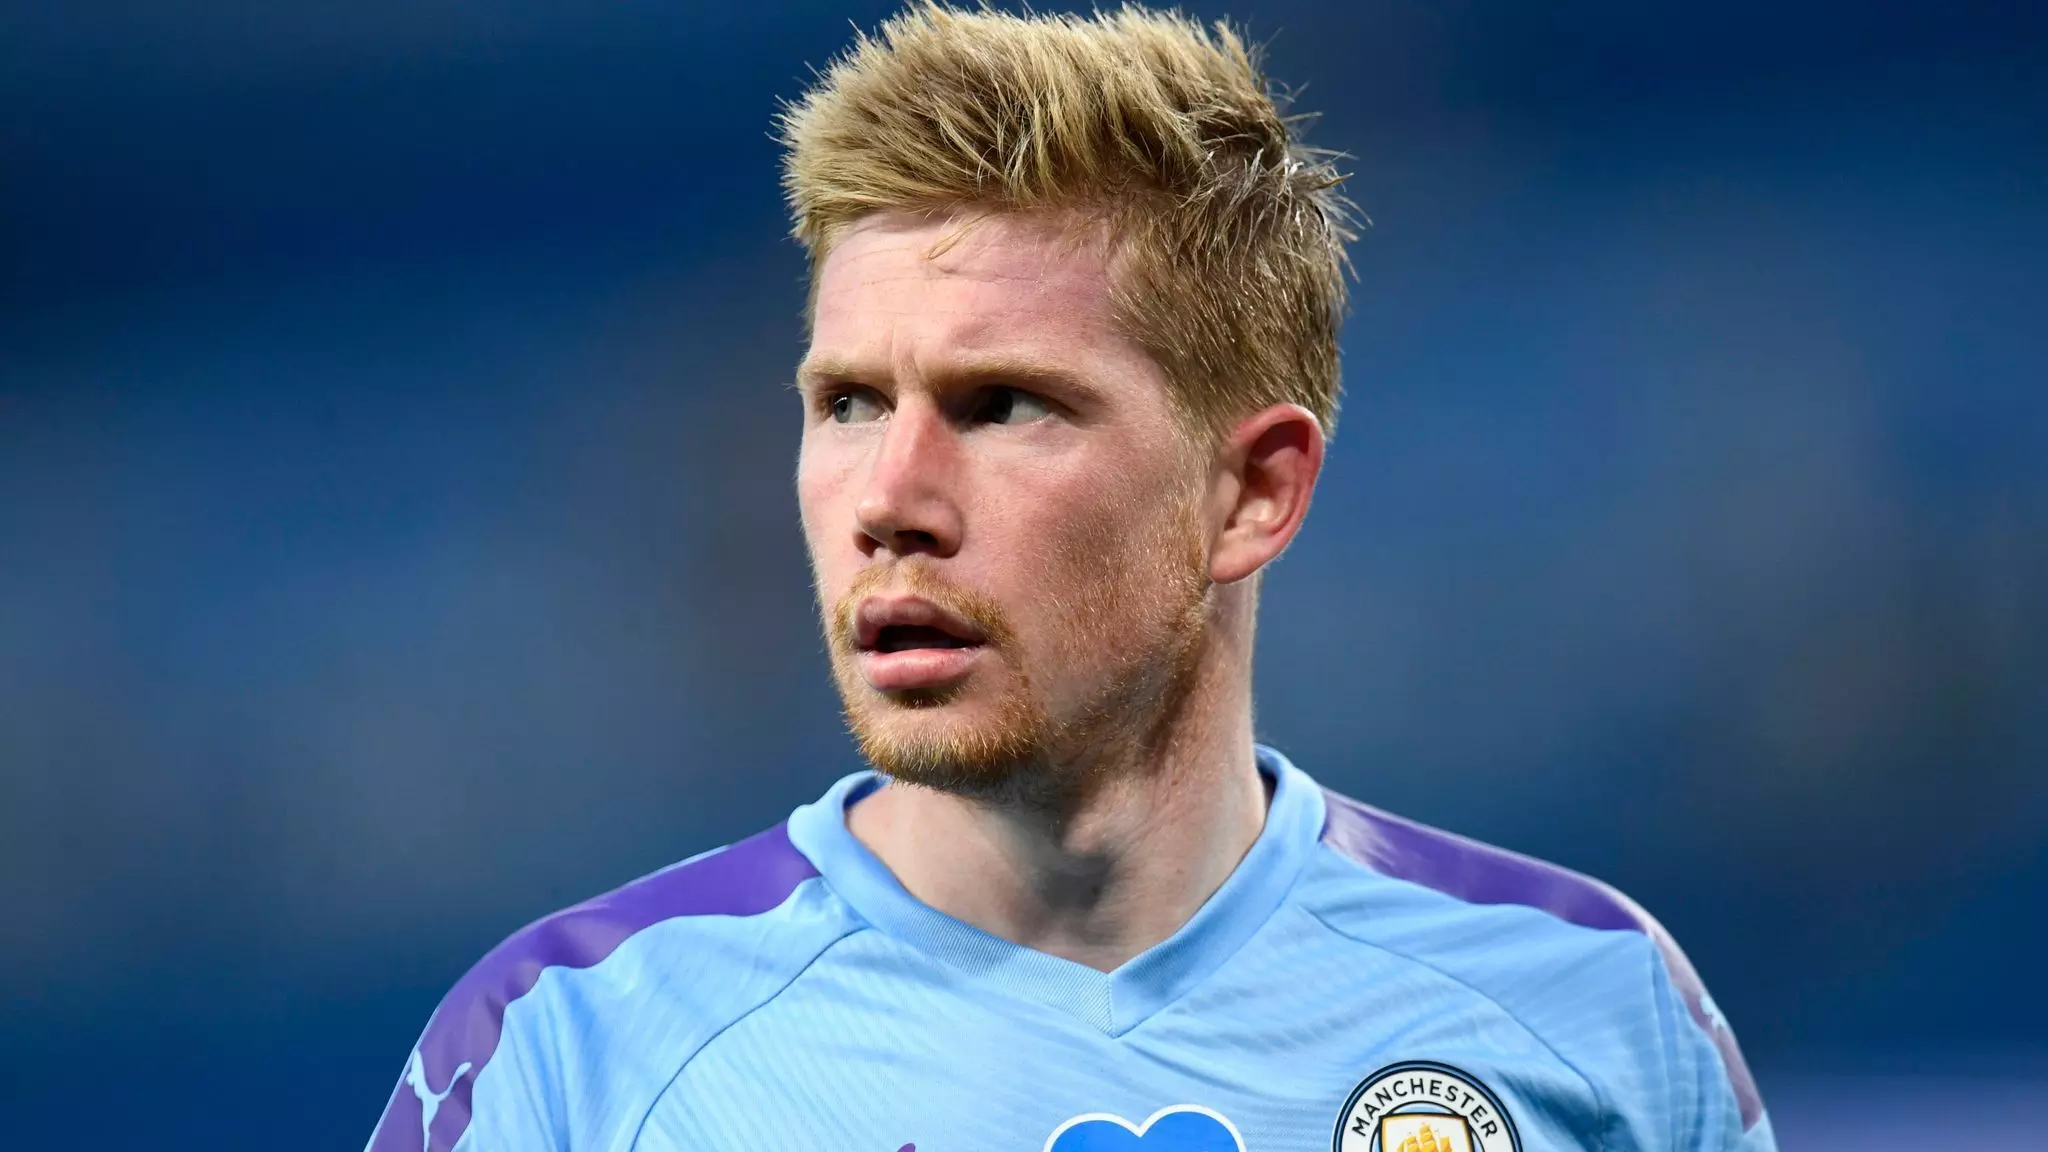 De Bruyne may miss Belgium League games for birth of child